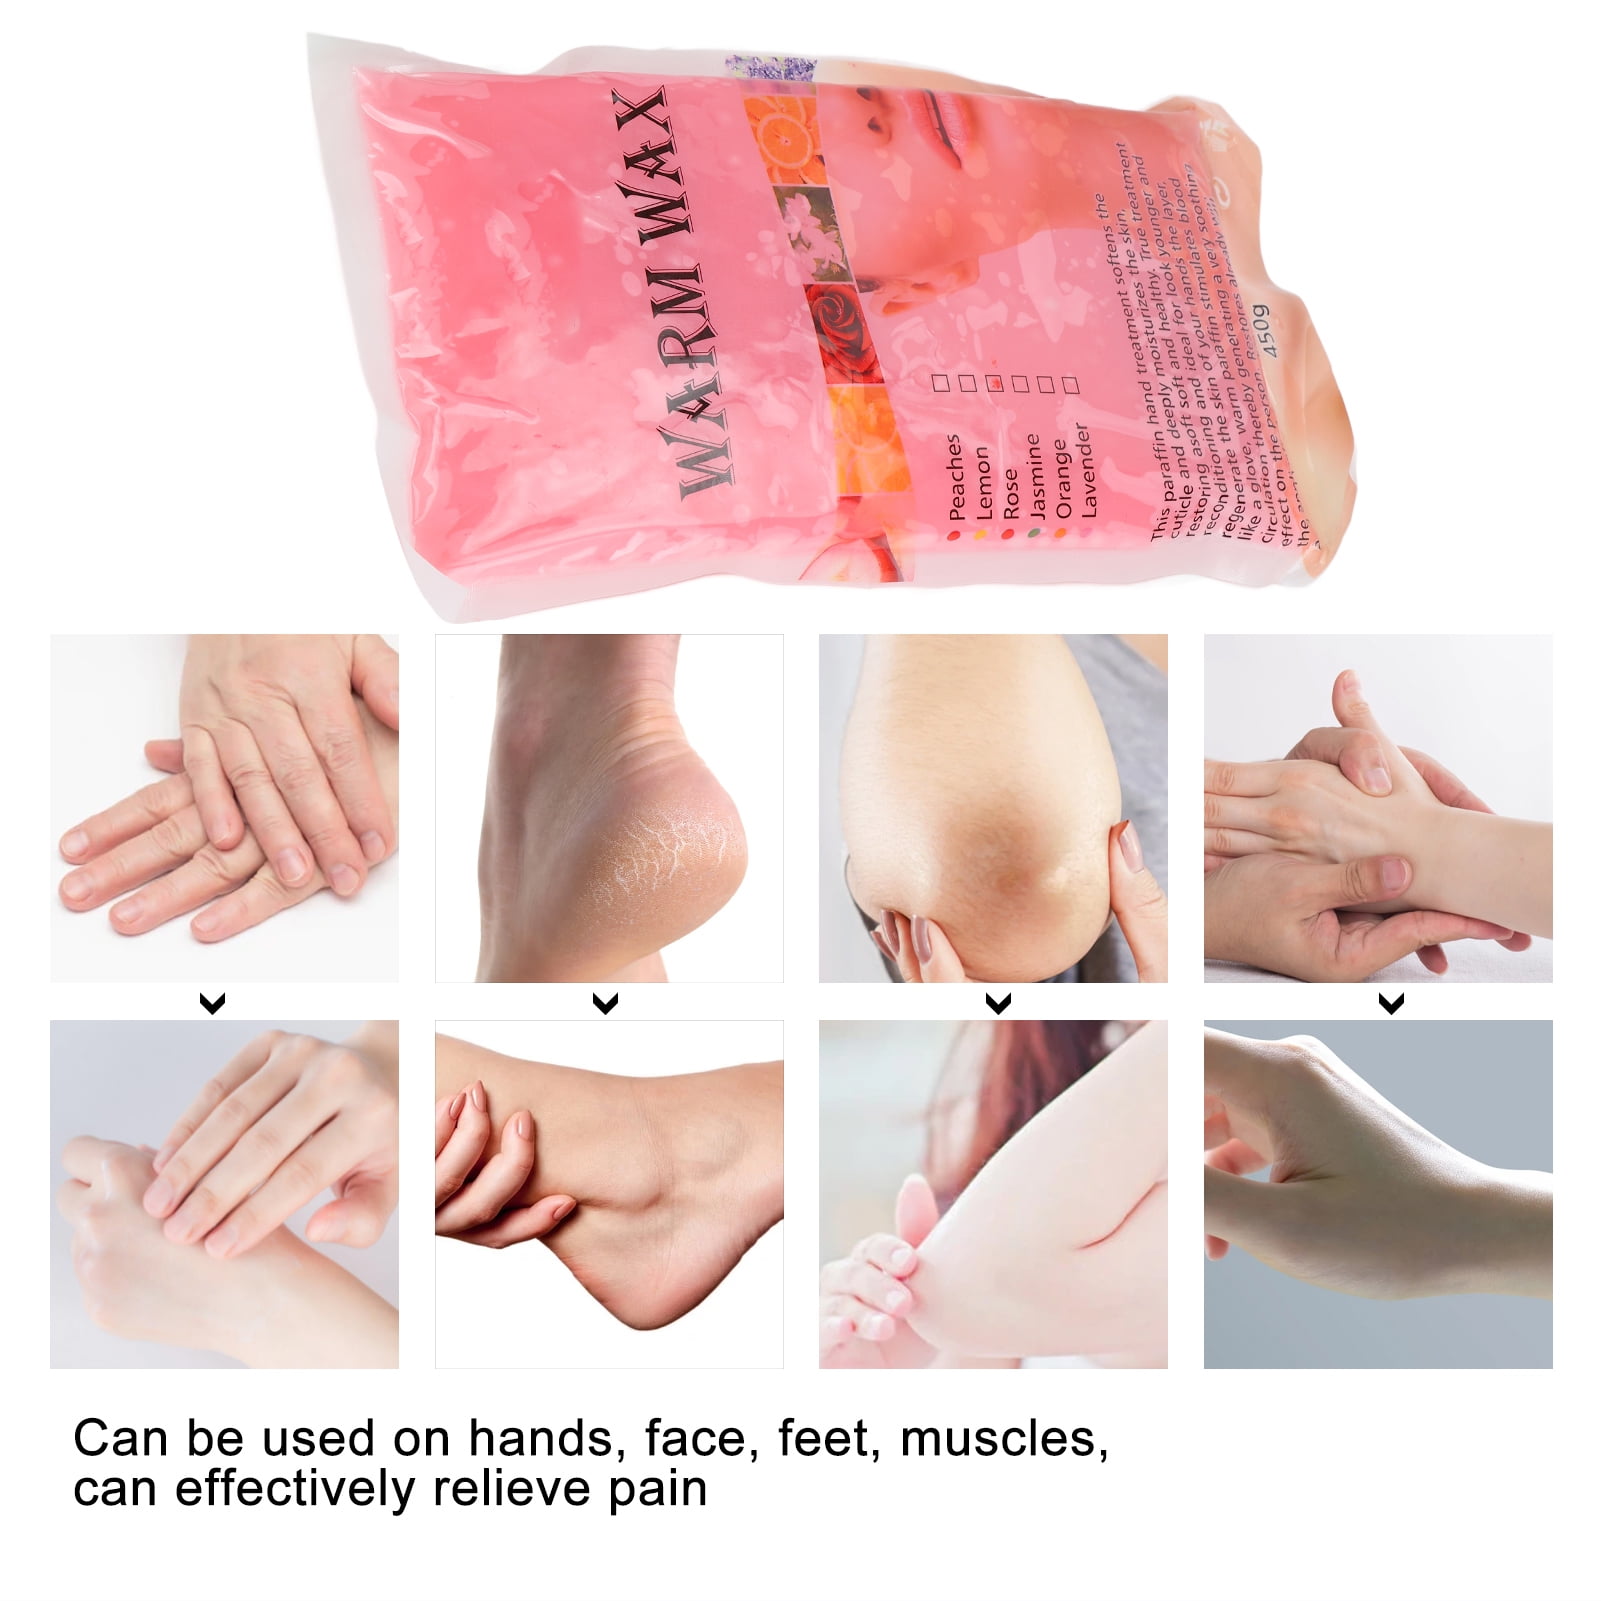 Suffering with Cracked Heels? Put Your Feet in Our Hands